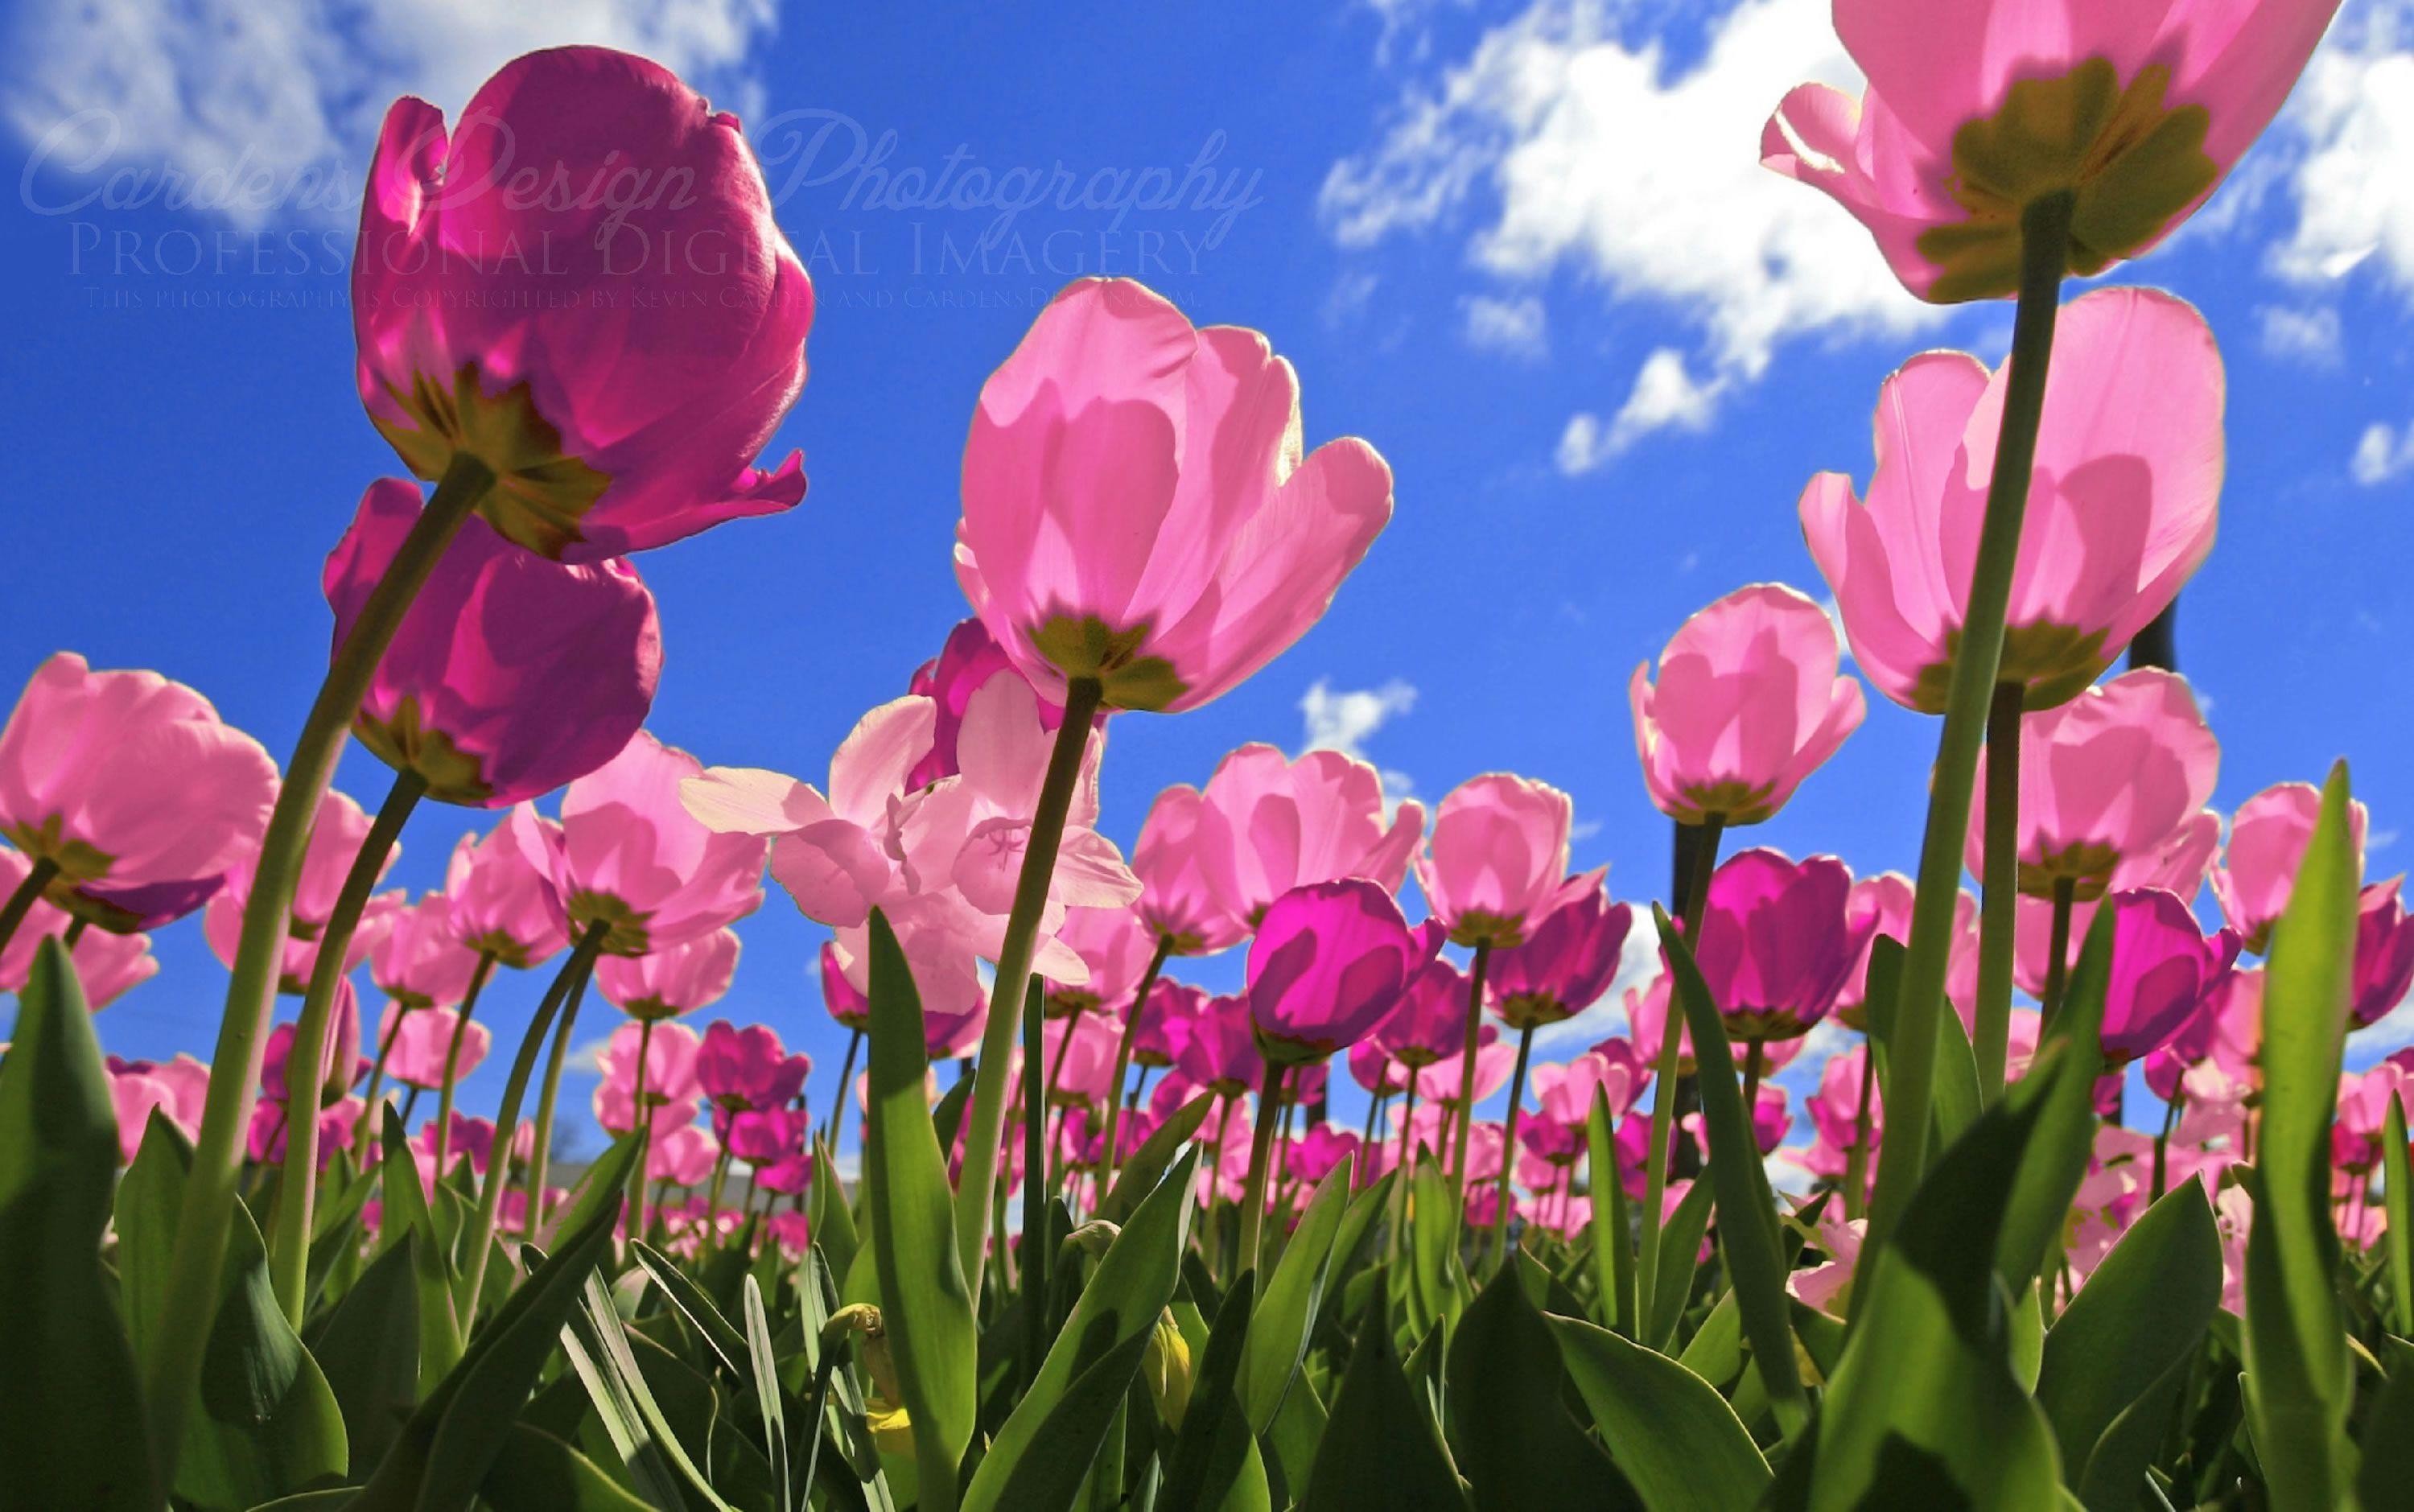 15 Best spring wallpaper tulips You Can Use It At No Cost - Aesthetic Arena